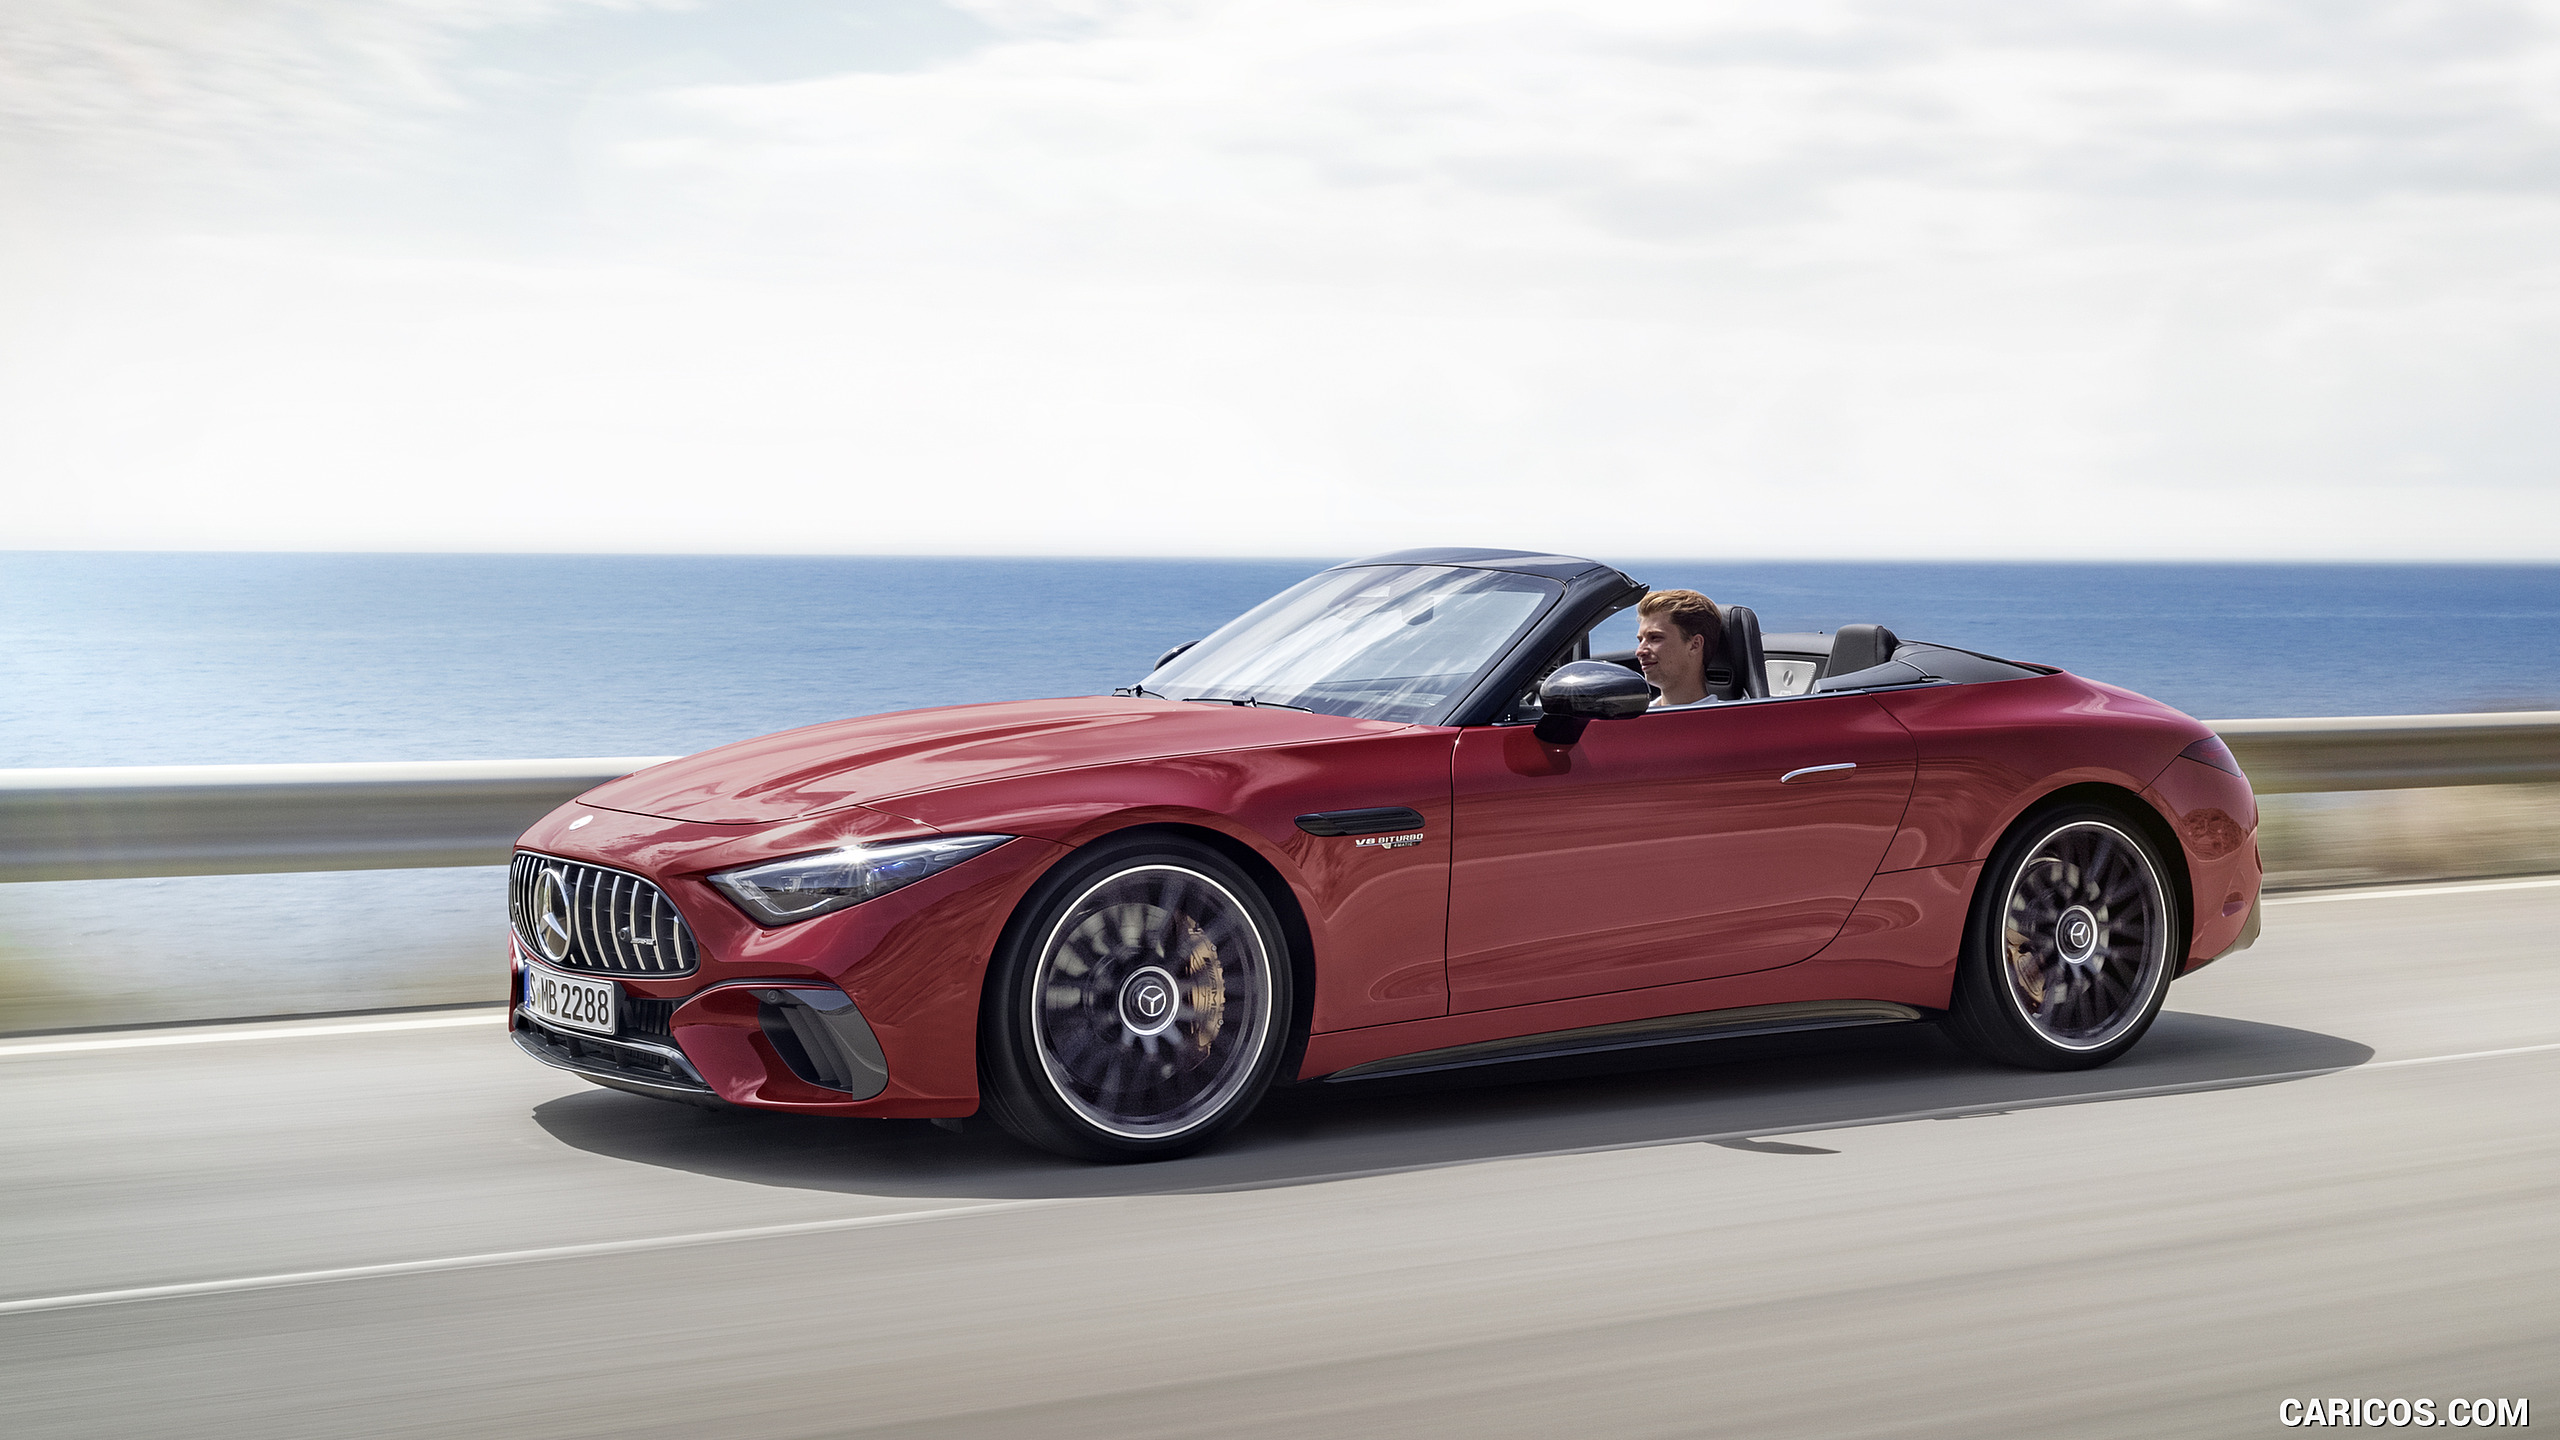 2022 Mercedes-AMG SL 63 4MATIC+ (Color: Patagonia Red Metallic) - Front Three-Quarter, #6 of 235